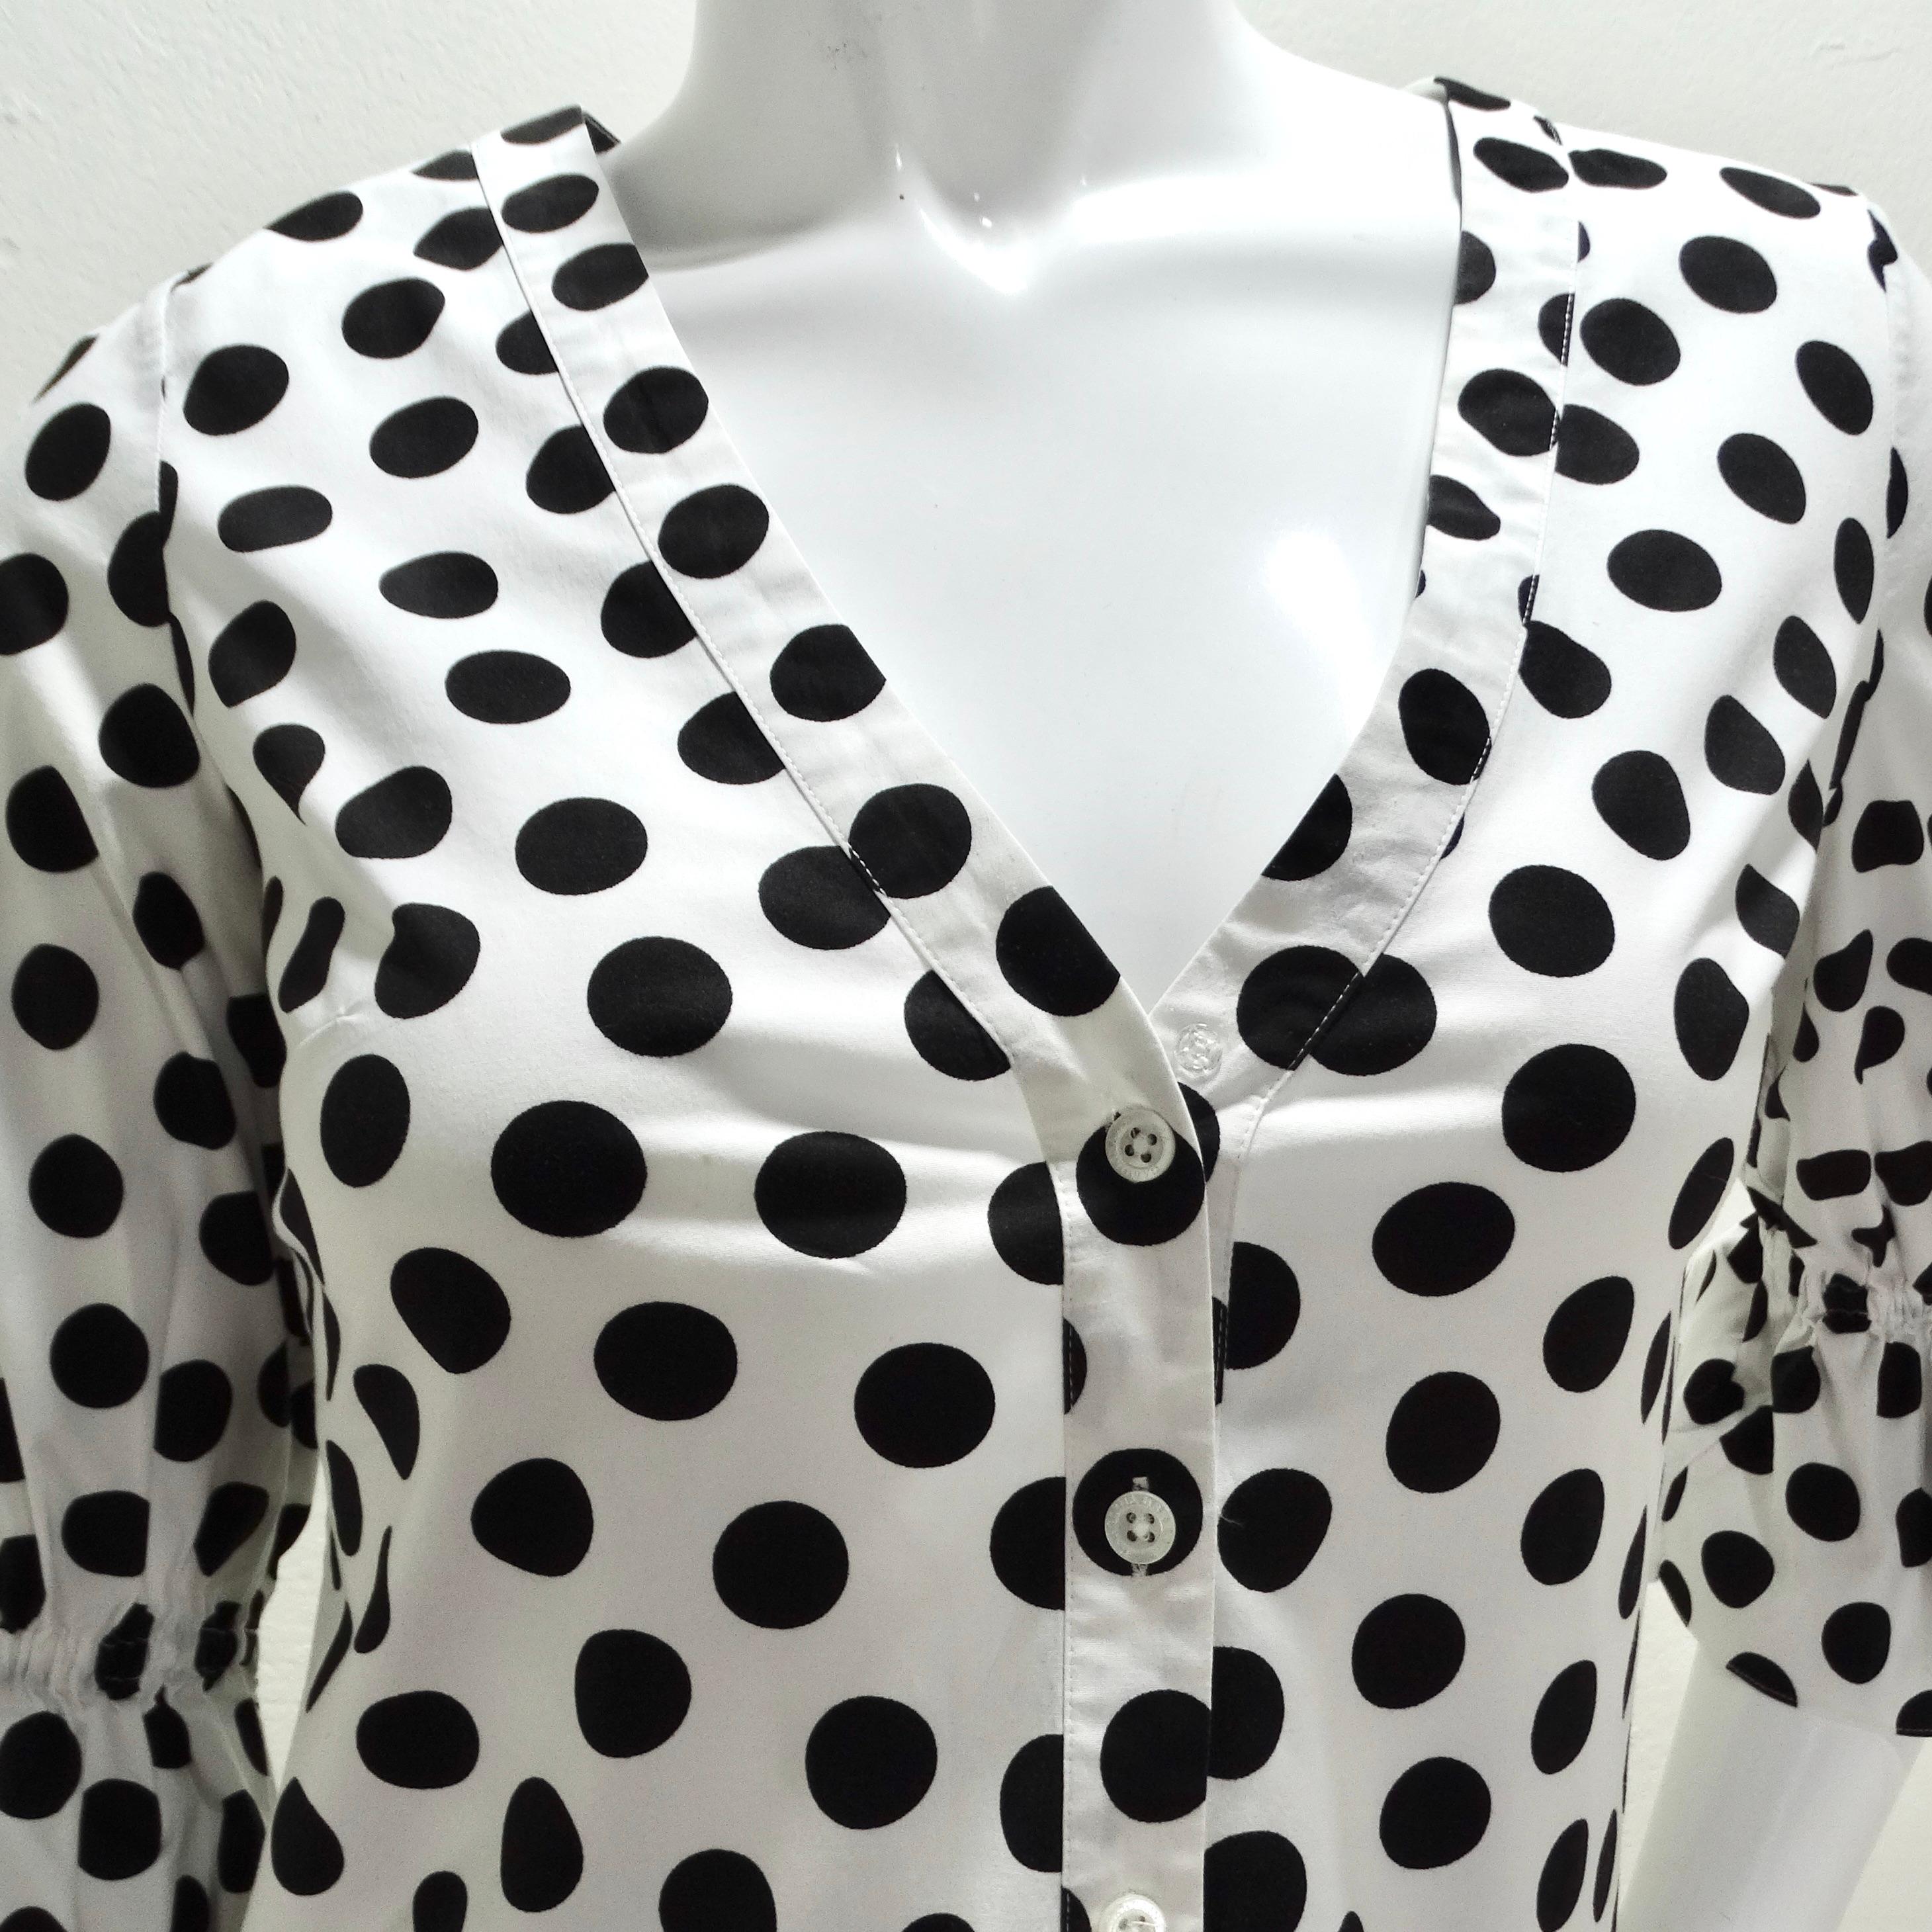 The Carolina Herrera Polka Dot Blouse is a timeless and chic addition to any wardrobe, perfect for adding a touch of playful elegance to your look. Crafted in a classic black and white polka dot pattern, this blouse exudes sophistication and